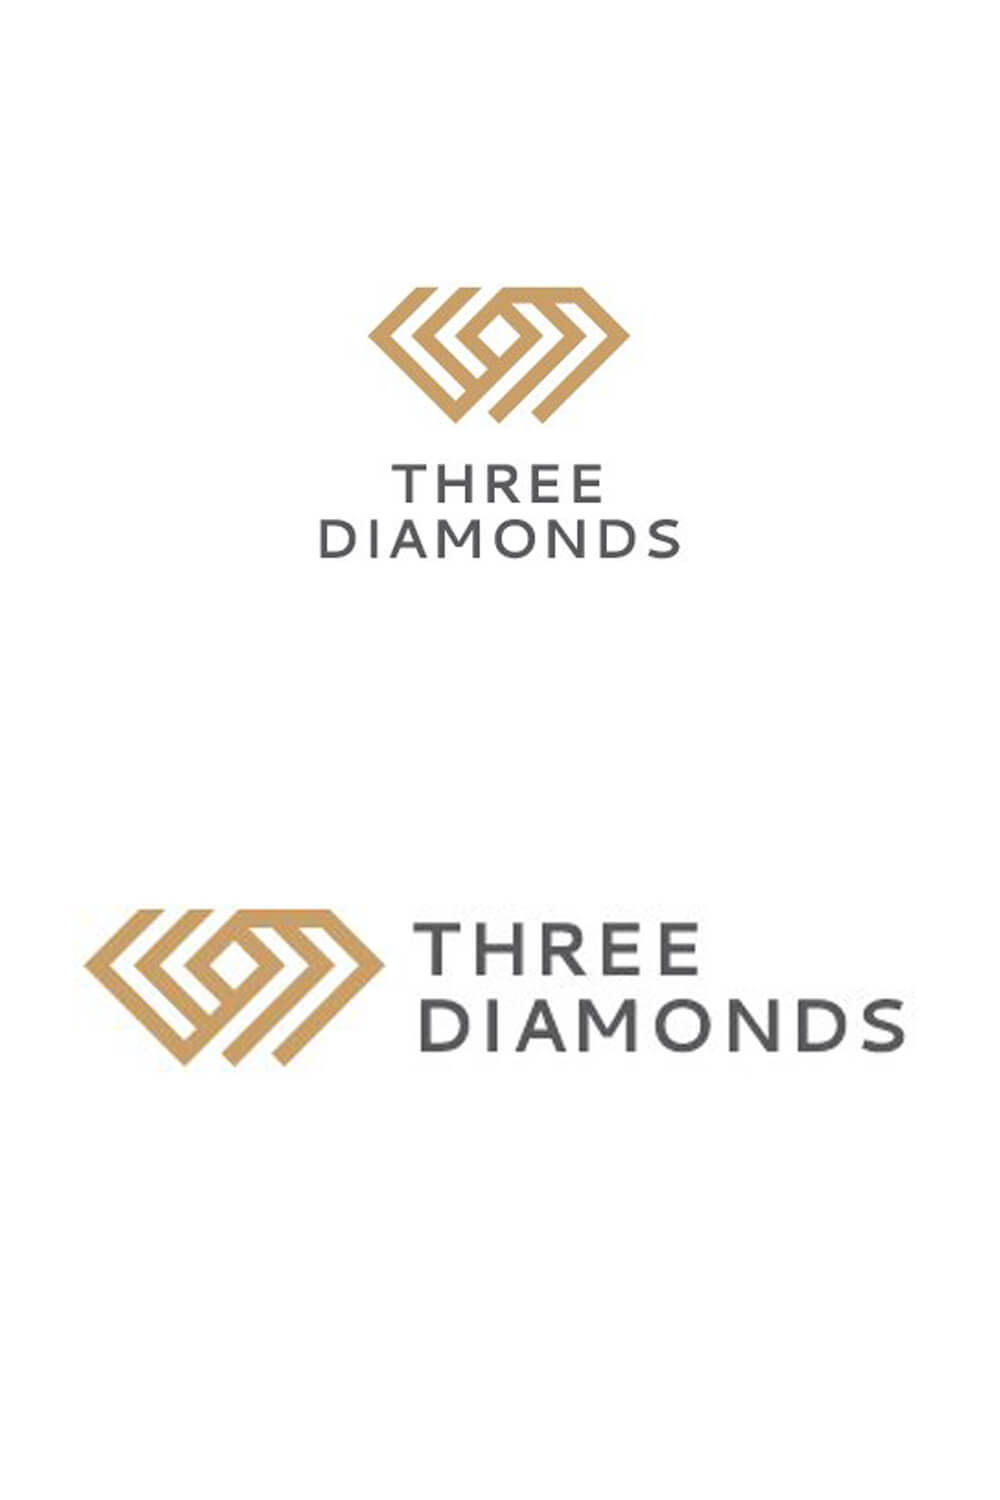 A triple gold diamond logo with the name underneath, and "Three diamonds" on the bottom of the design to the right.